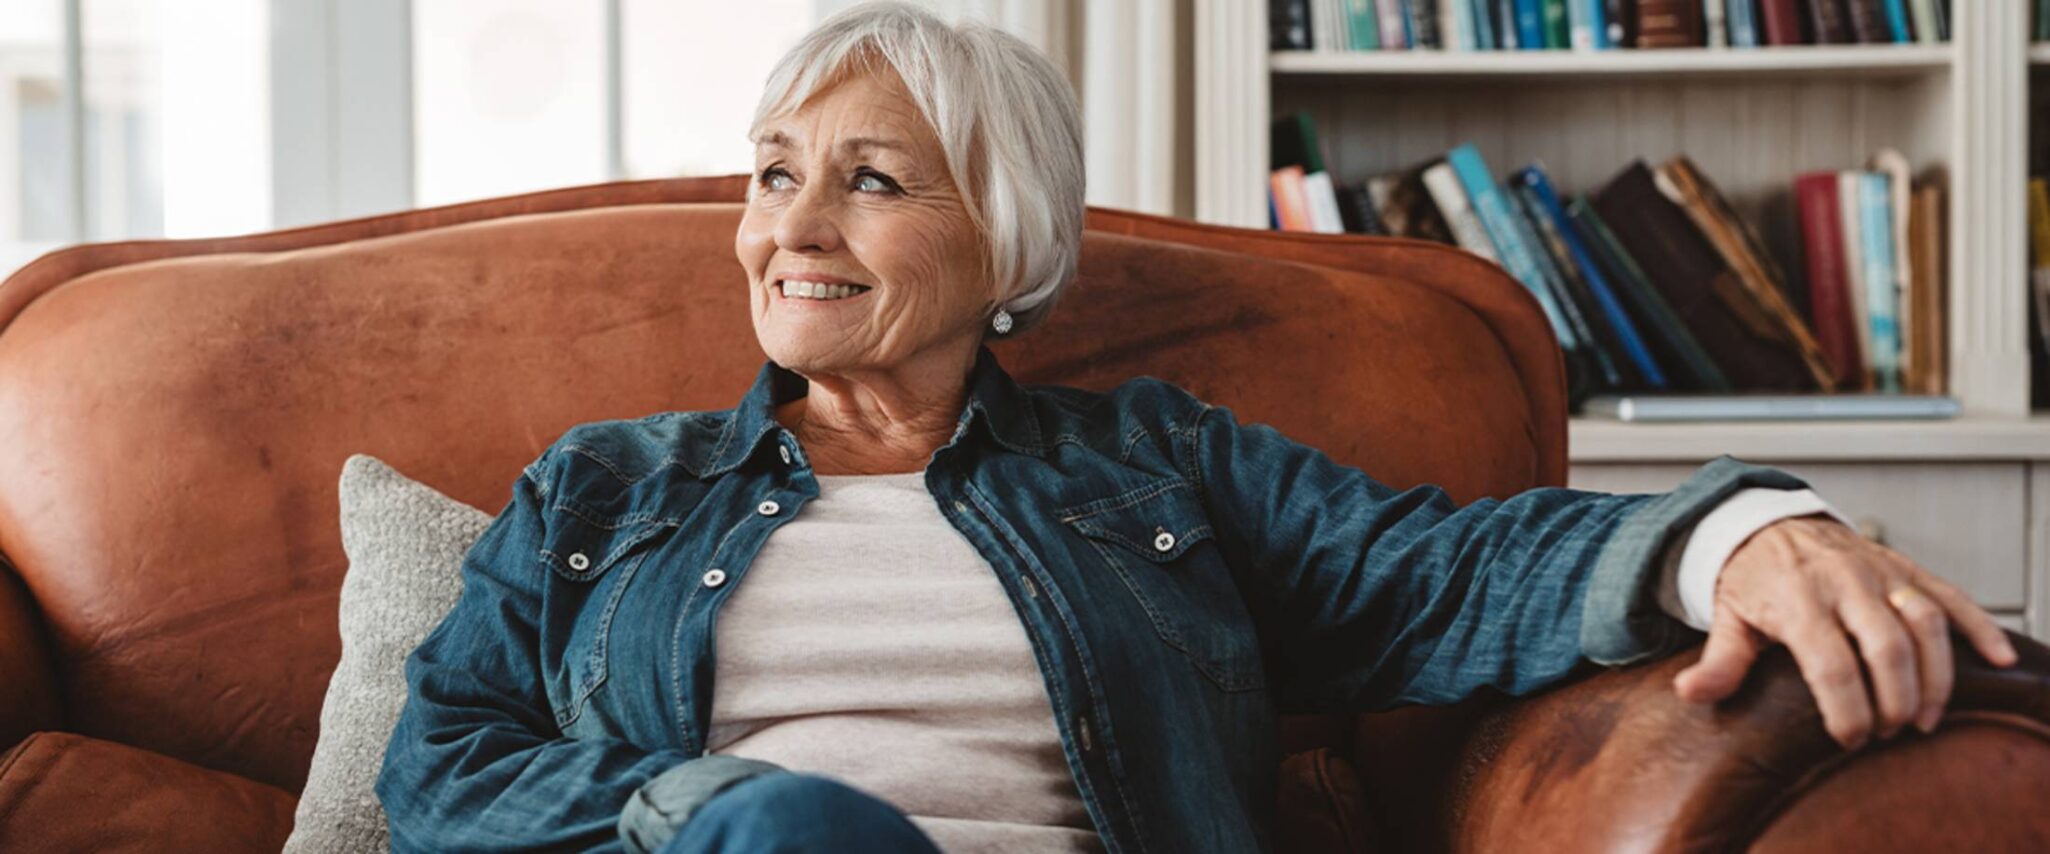 elderly woman sitting and relaxing on the couch